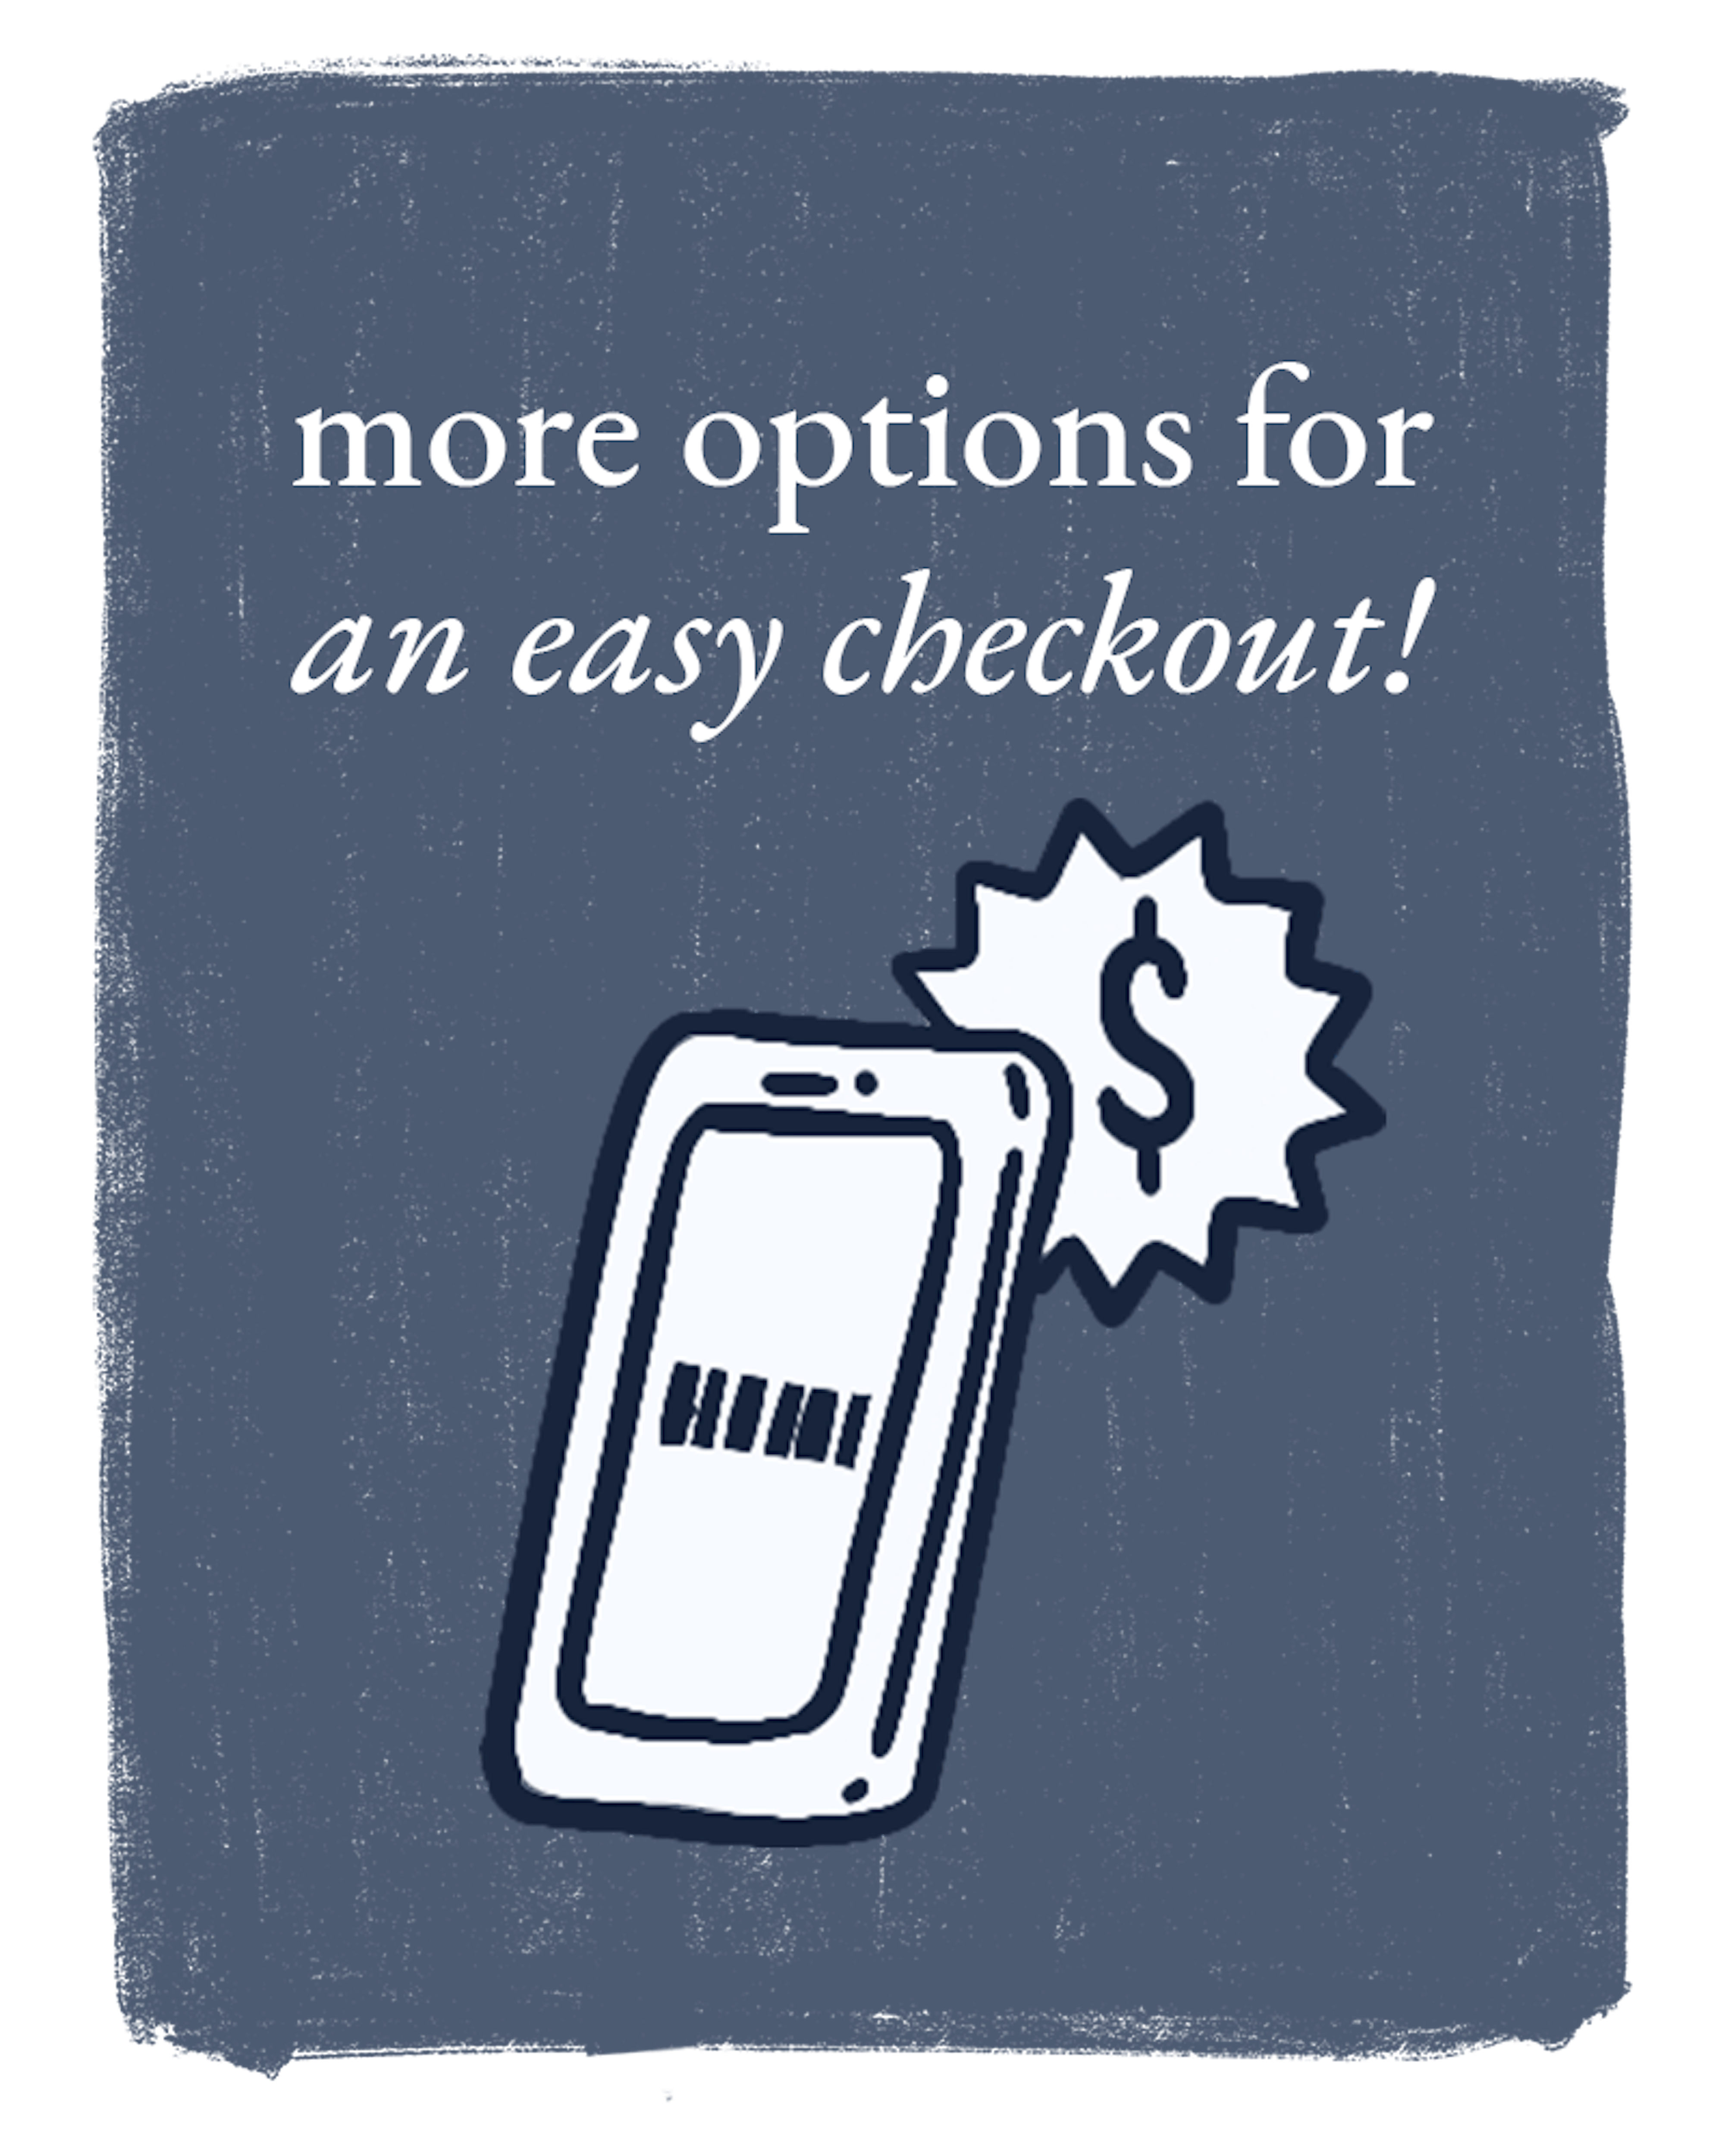 illustration of a phone and dollar sign with text that says "more options for an easy checkout"